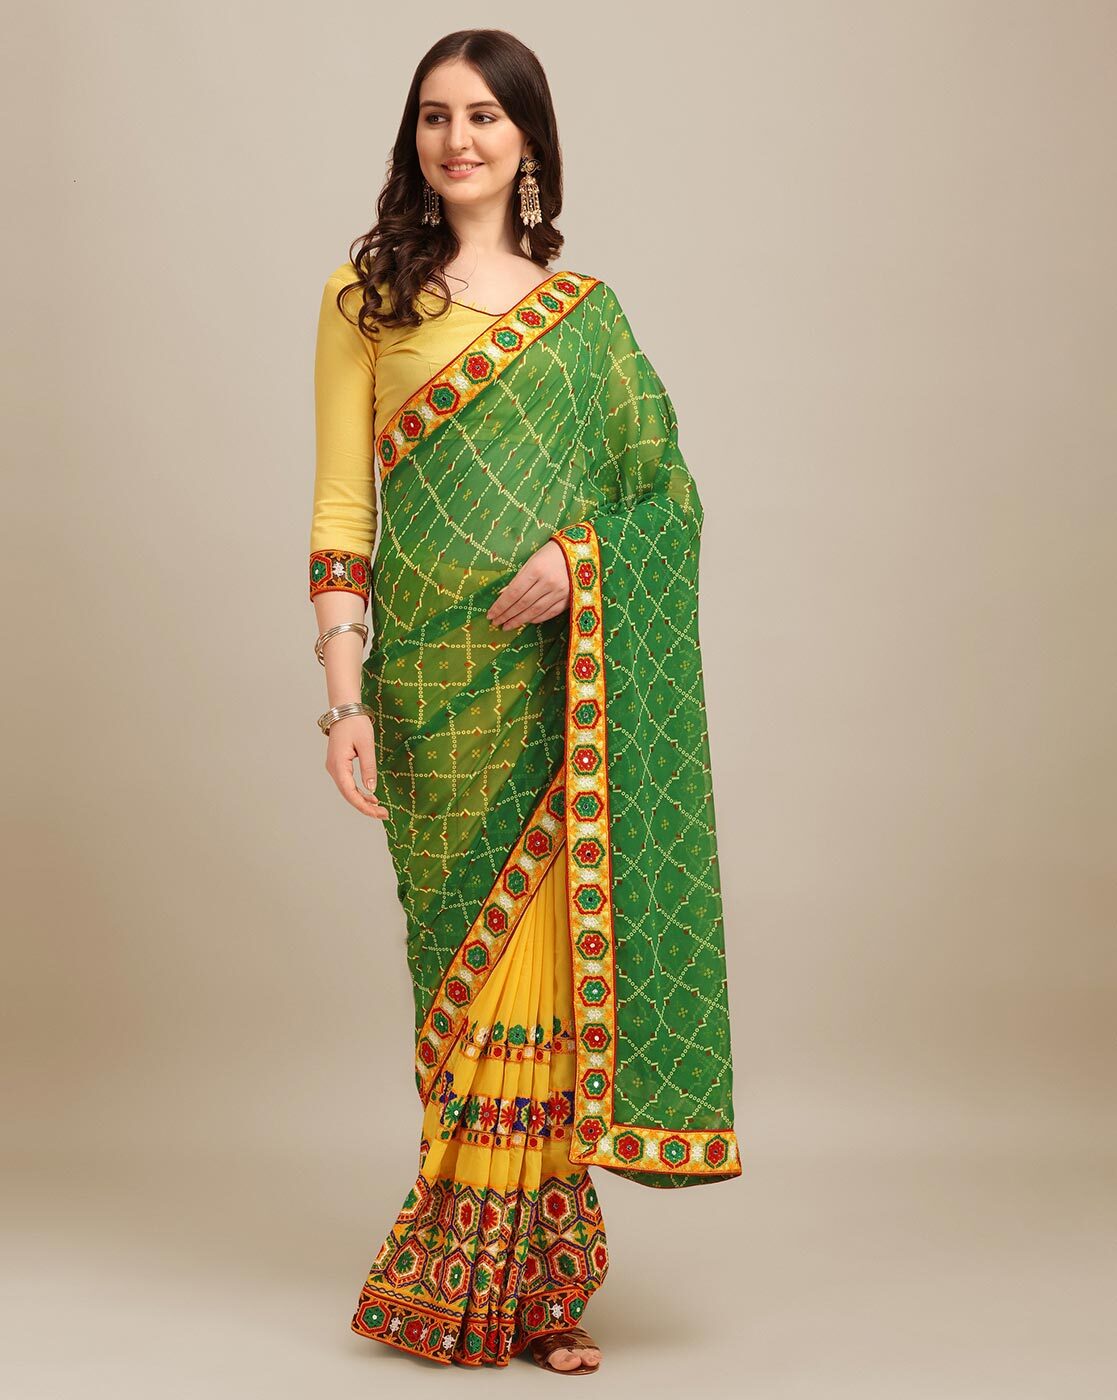 Fancy Party Wear Designer Saree Mustard Yellow with Green